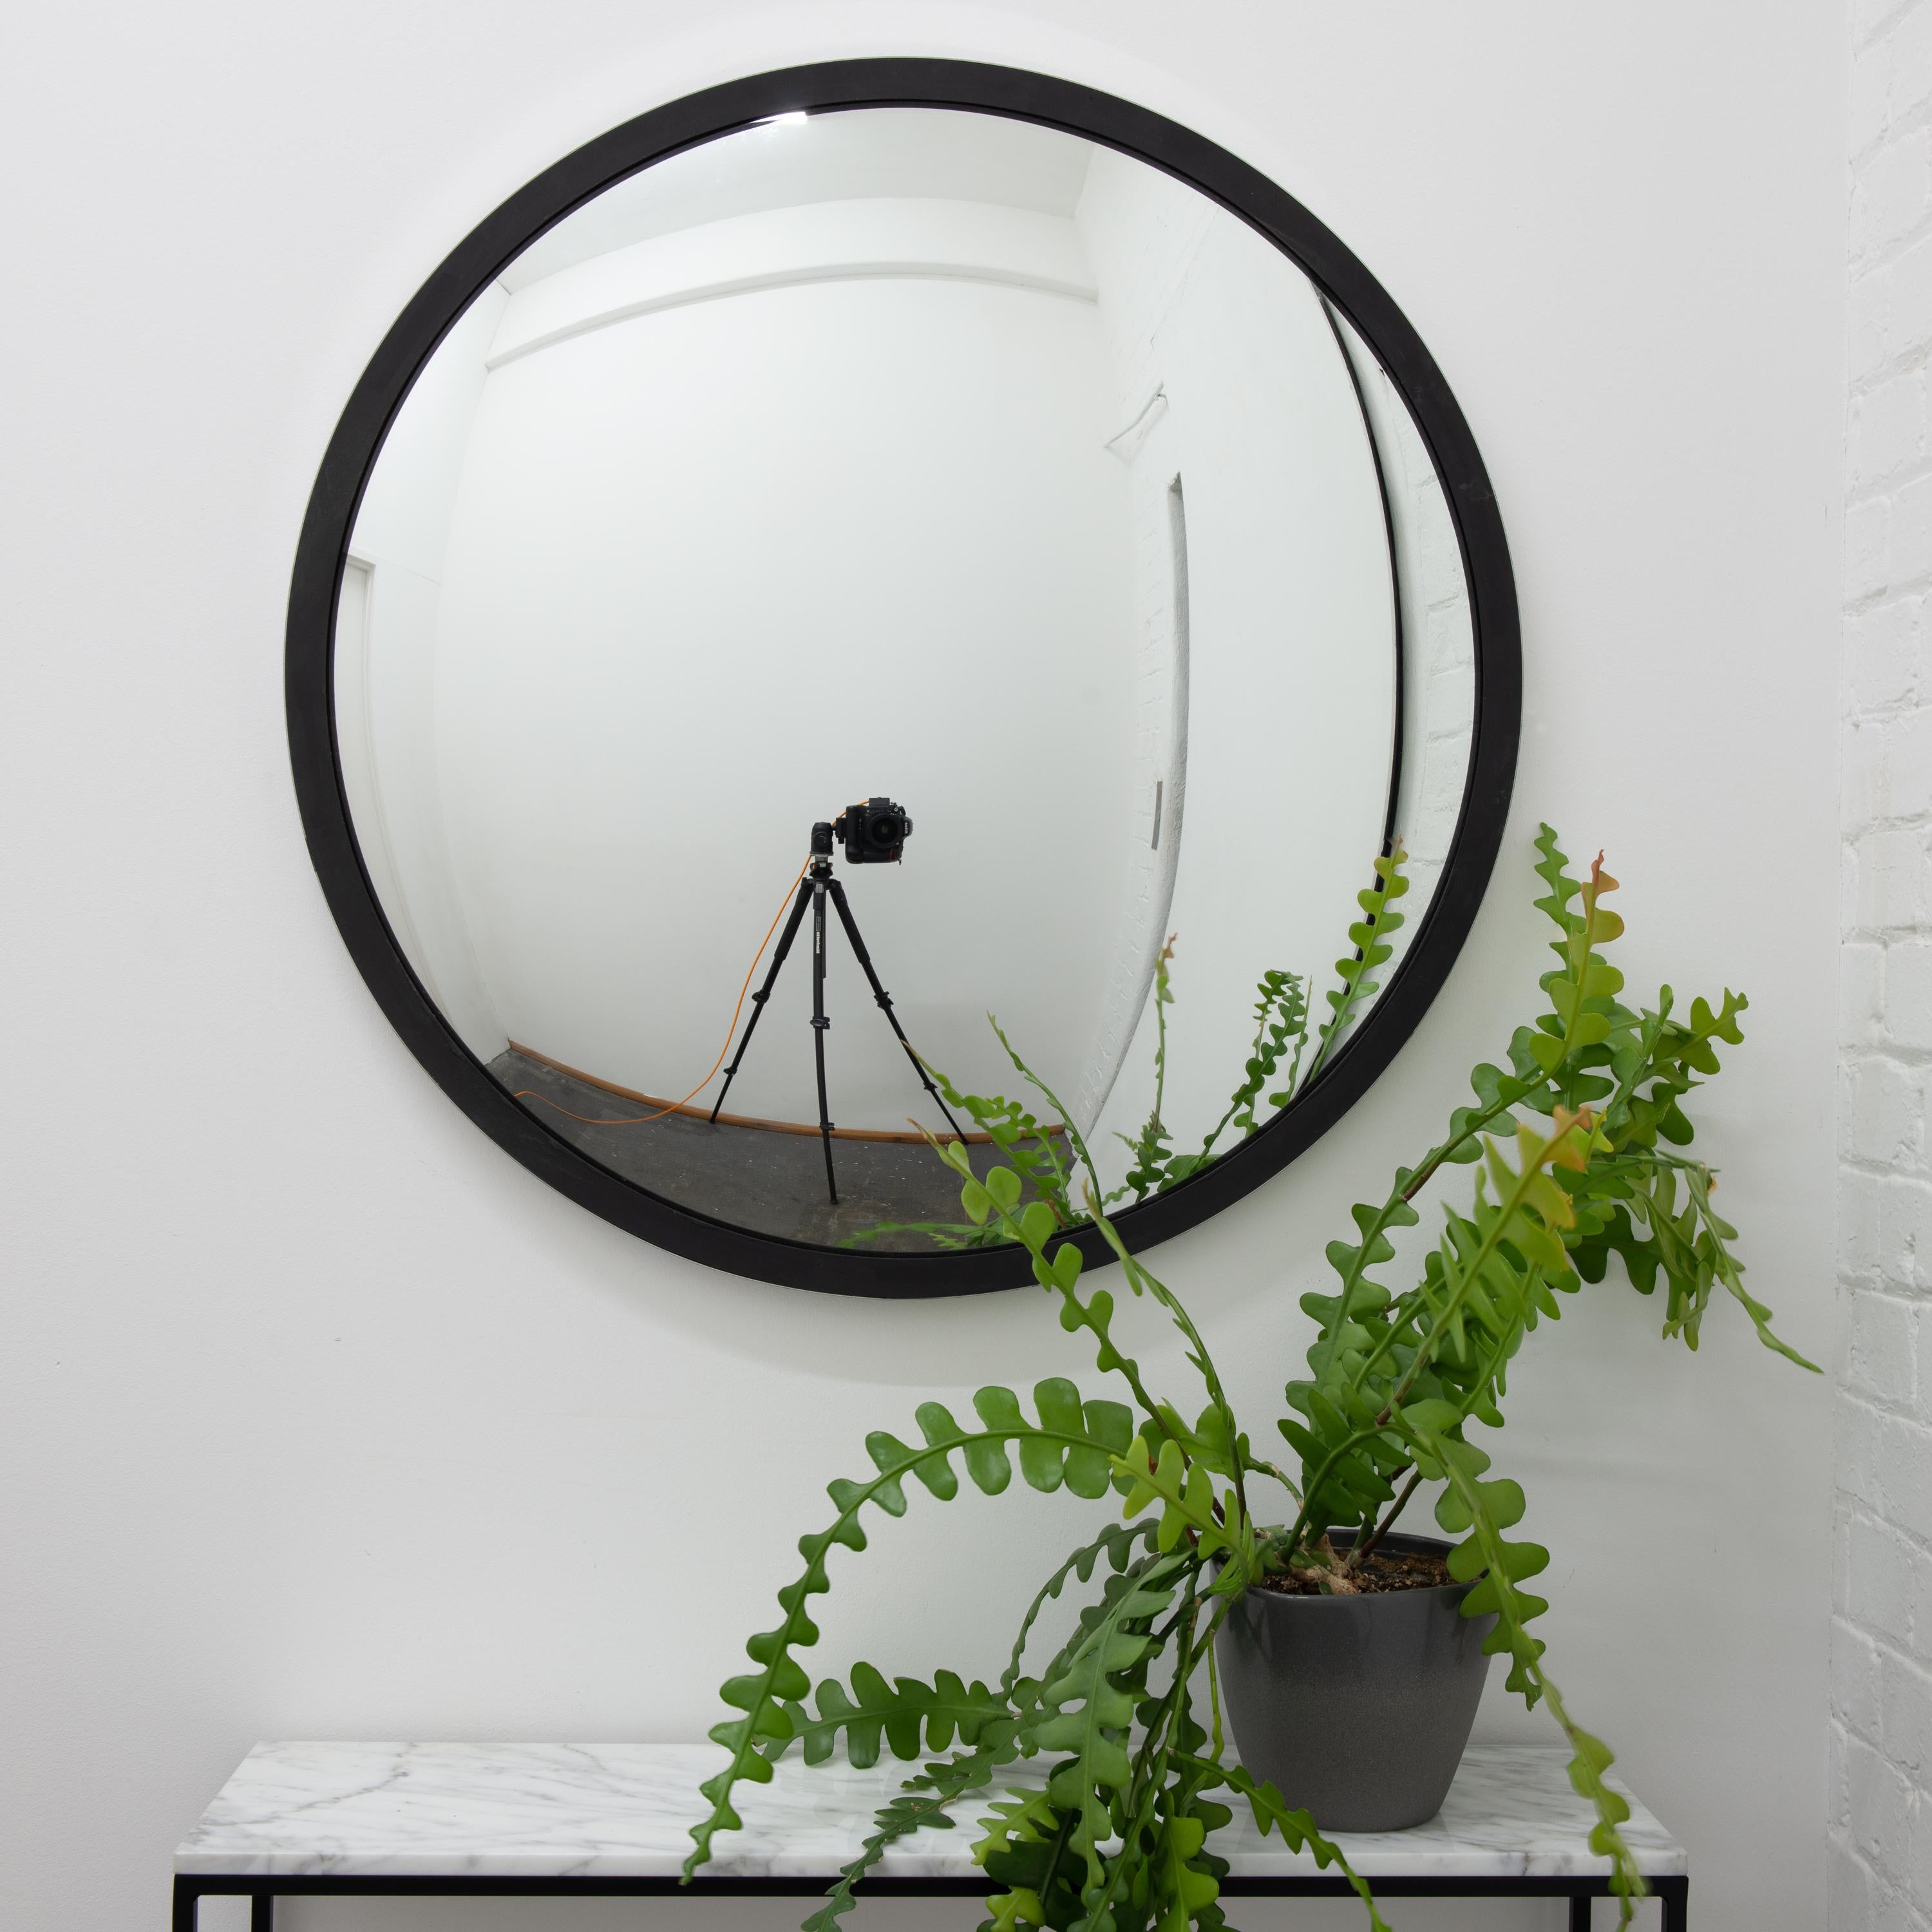 Stunning convex mirror with a polished stainless steel frame.

Each Orbis™ convex mirror is designed and handcrafted in London, UK. Slight variations in sizes and imperfections on edges and surface finishes are characteristics of such original